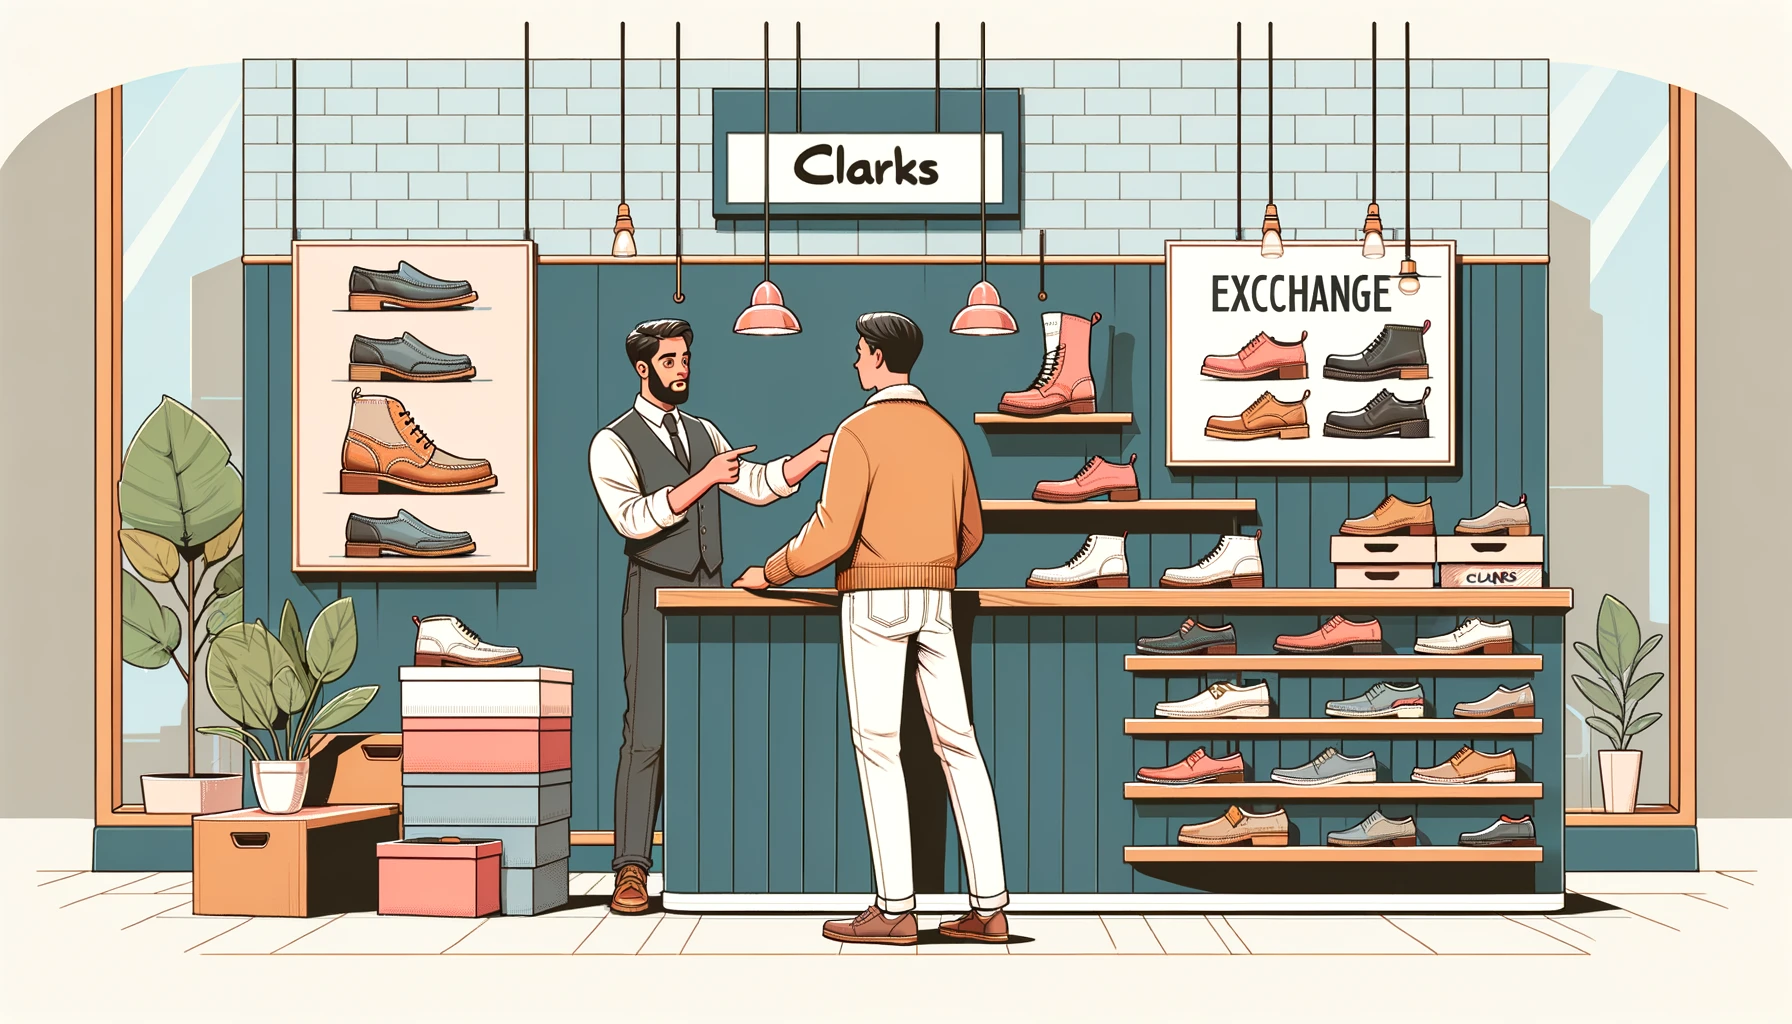 A practical guide to shoe size exchange for Clarks Wallabees. The image should depict a customer service counter in a stylish shoe store, with a variety of Clarks Wallabees on display. A helpful salesperson is assisting a customer, pointing to a size chart and explaining the exchange process. The setting should look inviting and professional, with the text 'Clarks' visible in the scene. The image should be horizontal with an aspect ratio of 16:9, emphasizing the customer-friendly atmosphere.